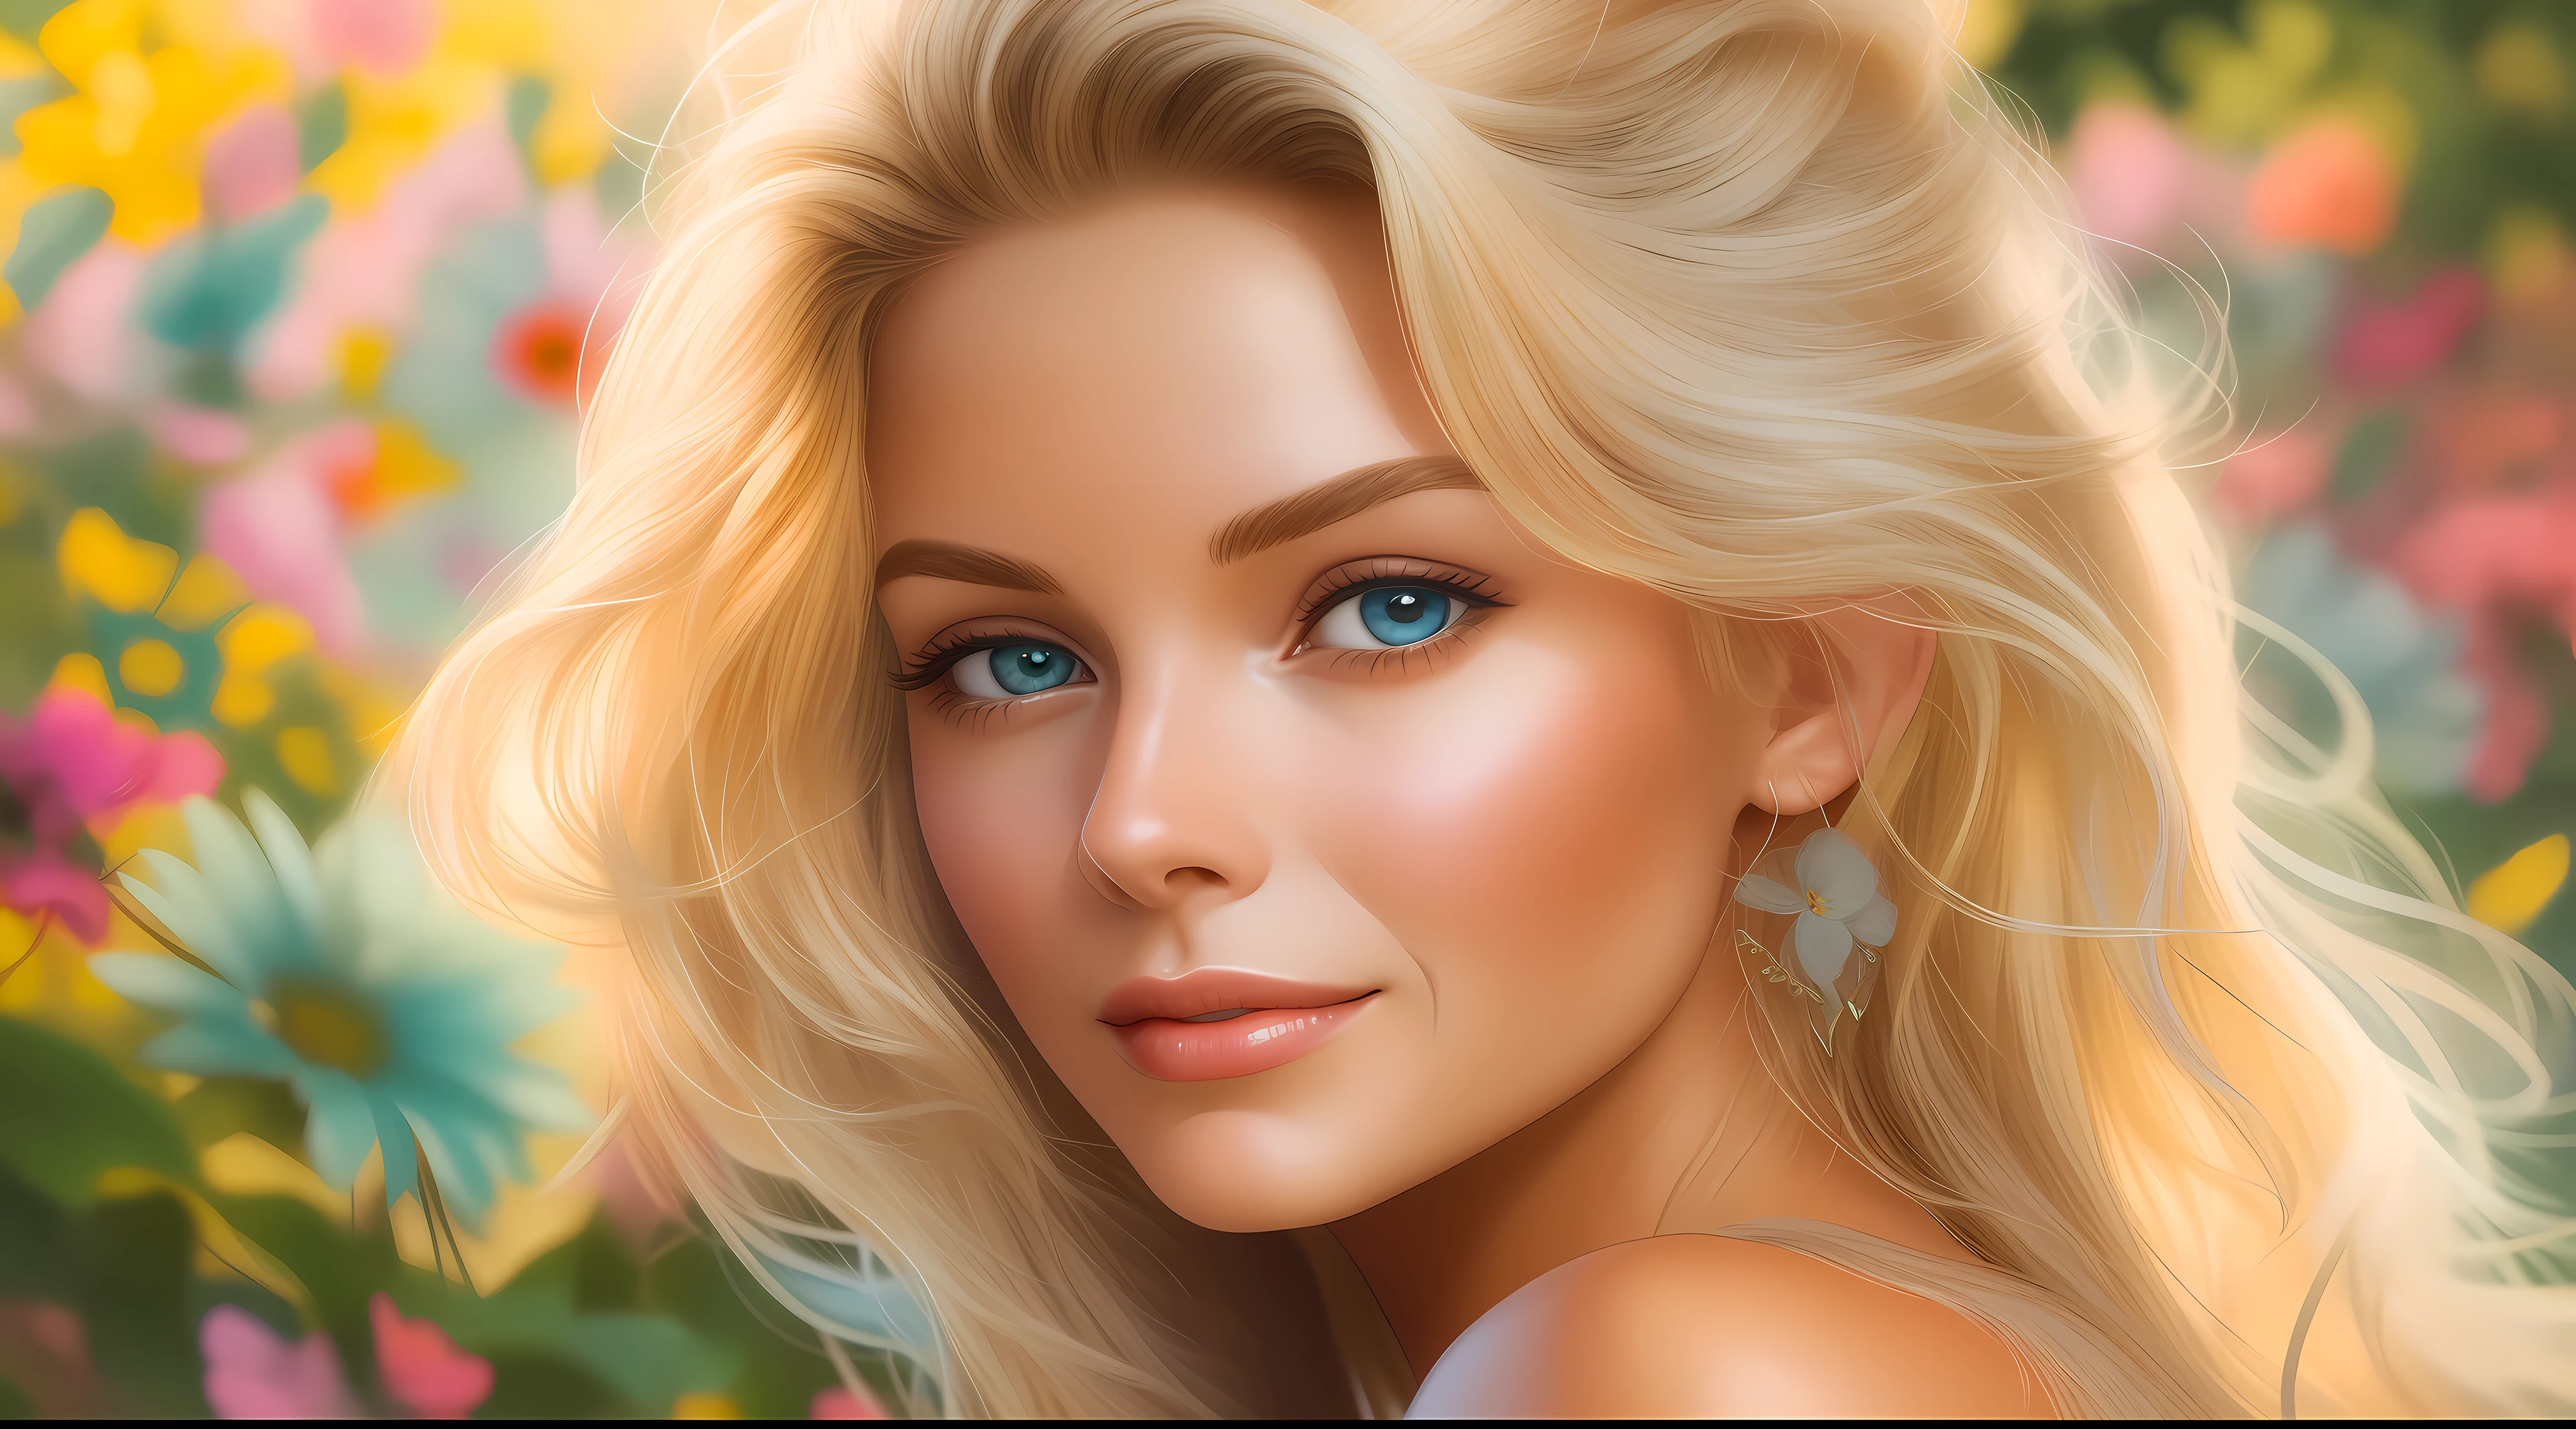 beautiful young woman, age 25, admire the very colorful butterflies in the garden with beautiful and colorful flowers. Her blonde hair is illuminated by the sun shining in the sky, creating an effect of harmony and joy. She has fair skin and a sweet smile, that reveal your beauty and happiness. His high-resolution portrait shows the details of his face and his emotion, that seem to infect the environment. She is a goddess of blonde hair., with a vibrant and unique color. [Michelle Pfeiffer young 0.2]